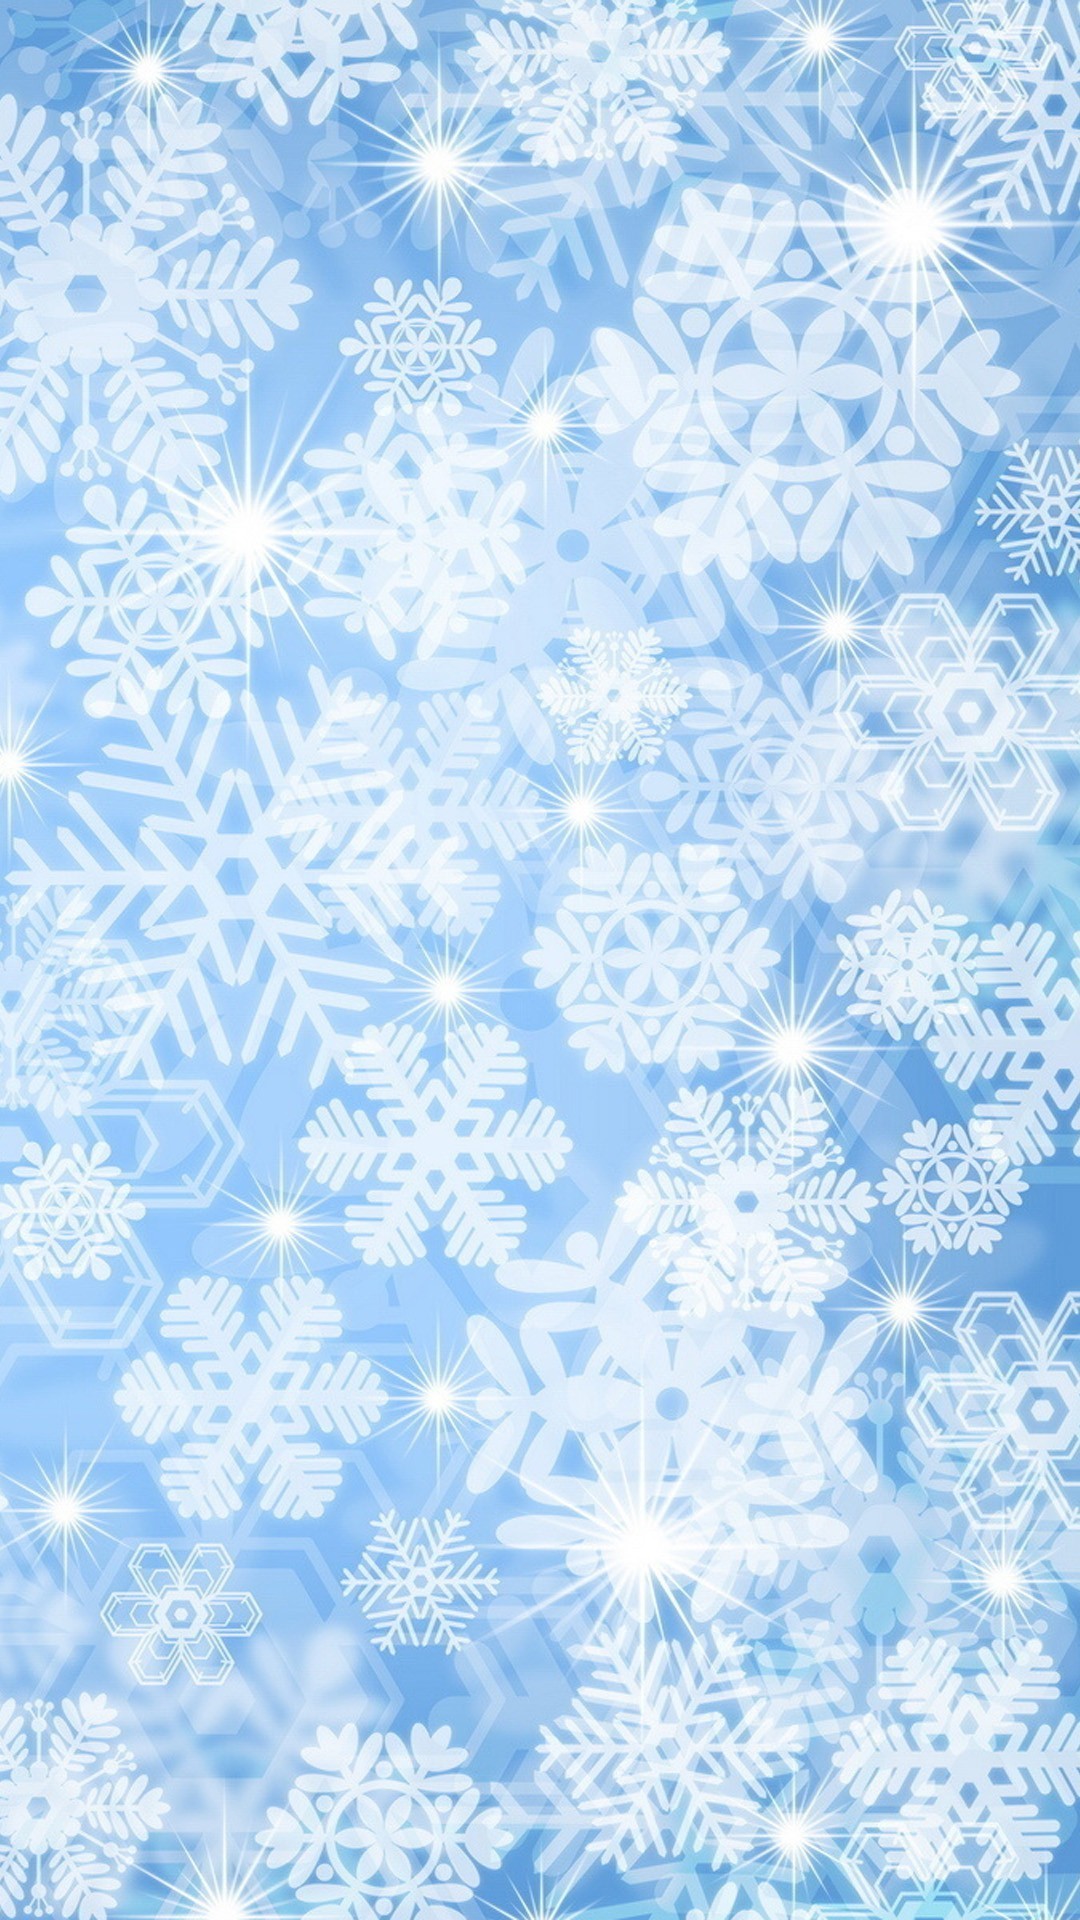 1080x1920 snowflake iphone wallpaper winter themed backgrounds 183 13000